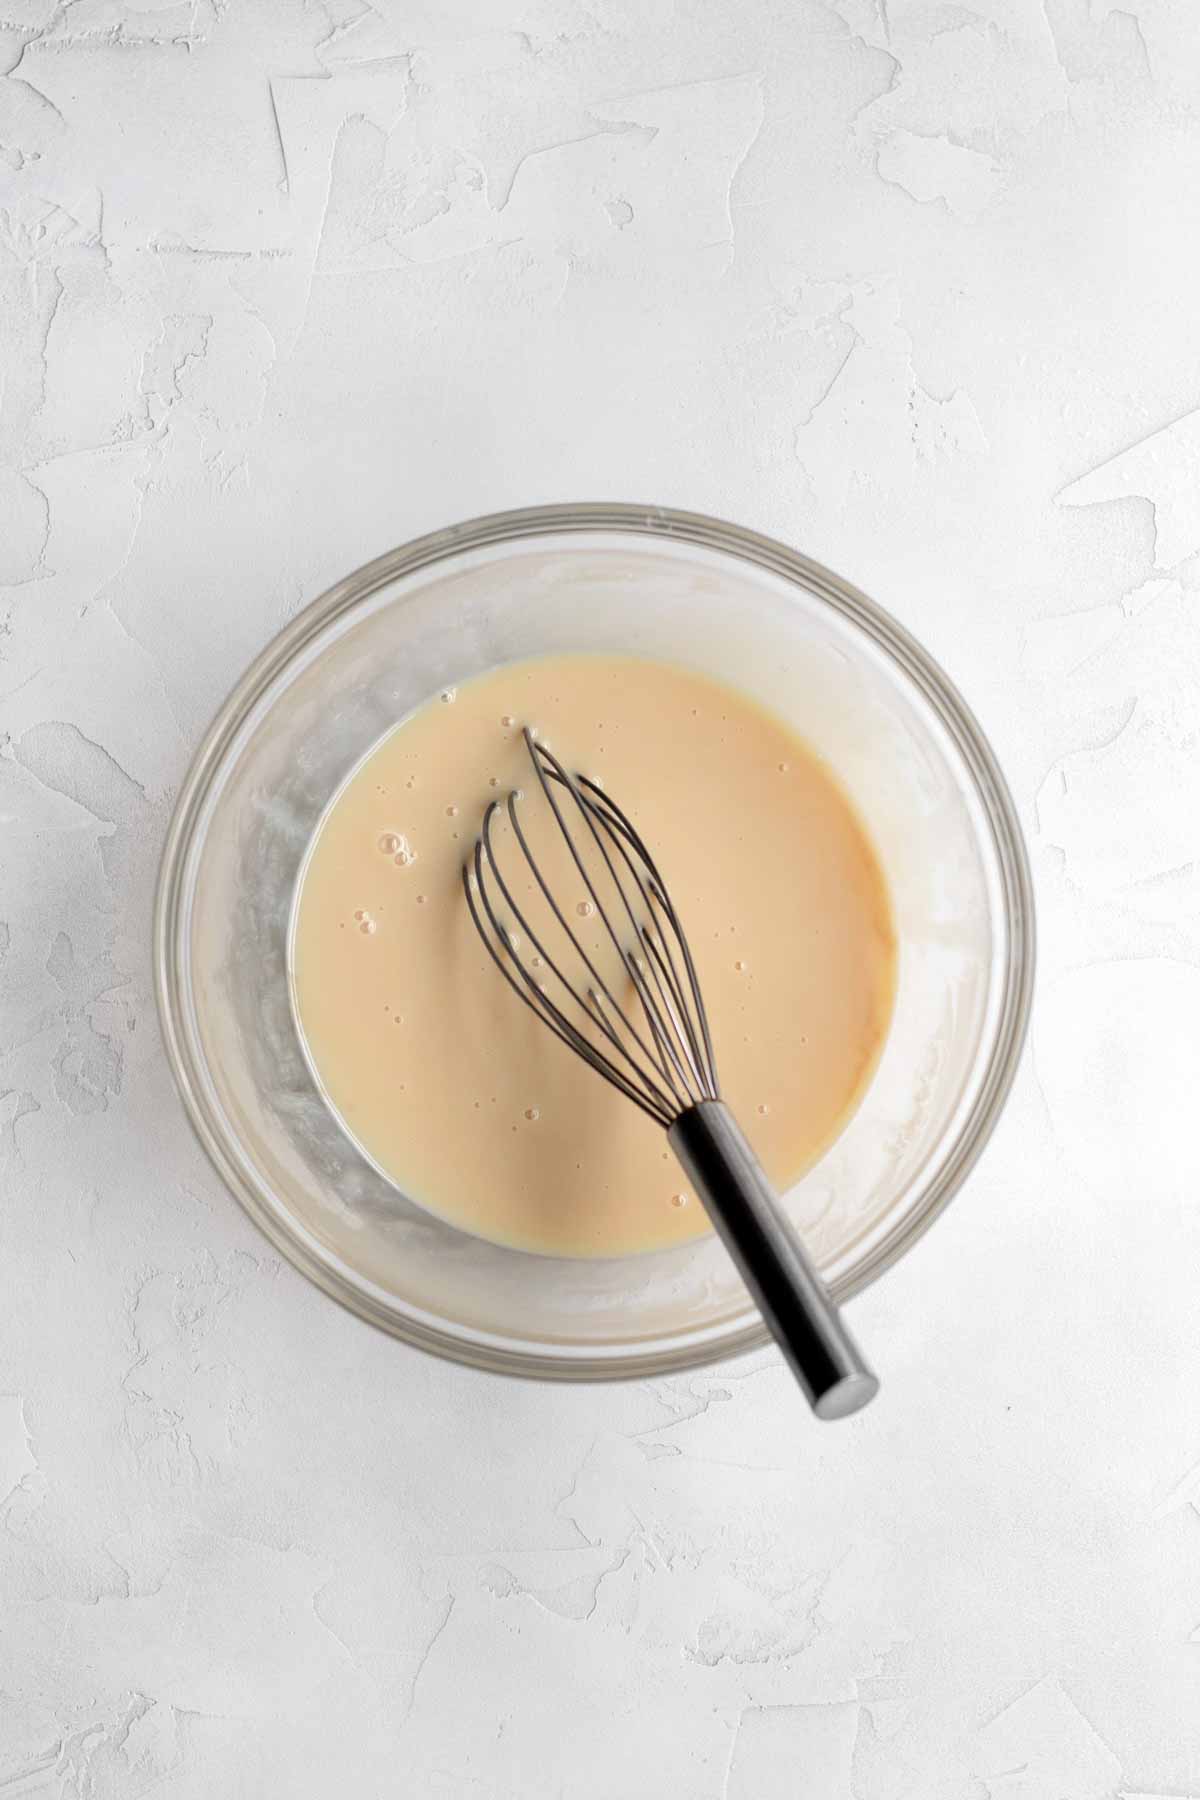 Sweetened condensed milk, vanilla and salt mixed in a bowl.